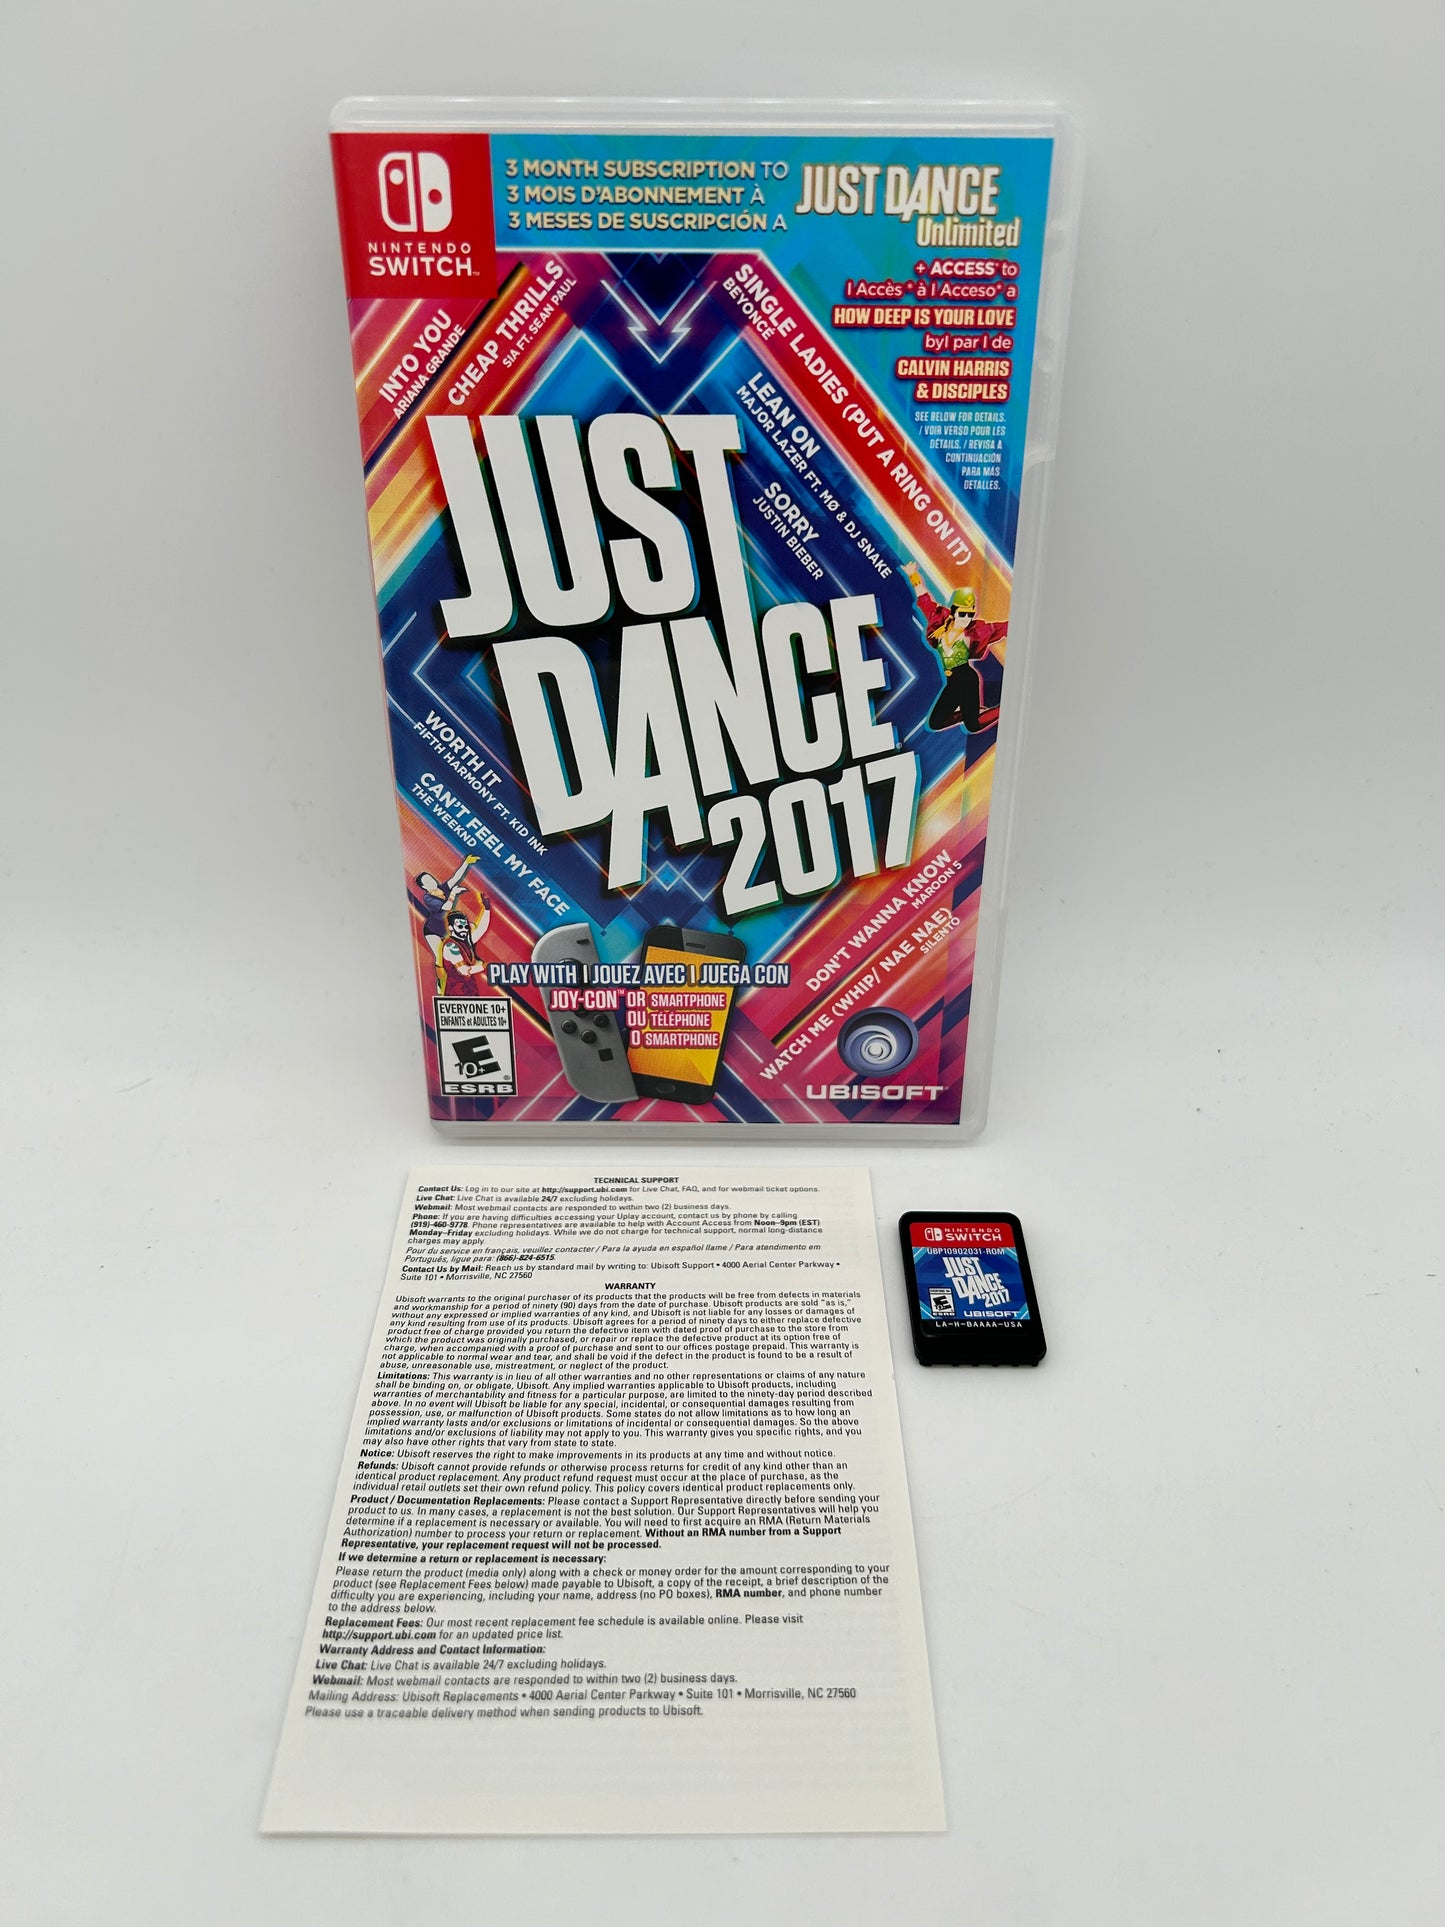 PiXEL-RETRO.COM : NINTENDO SWITCH NEW SEALED IN BOX COMPLETE MANUAL GAME NTSC JUST DANCE 2017